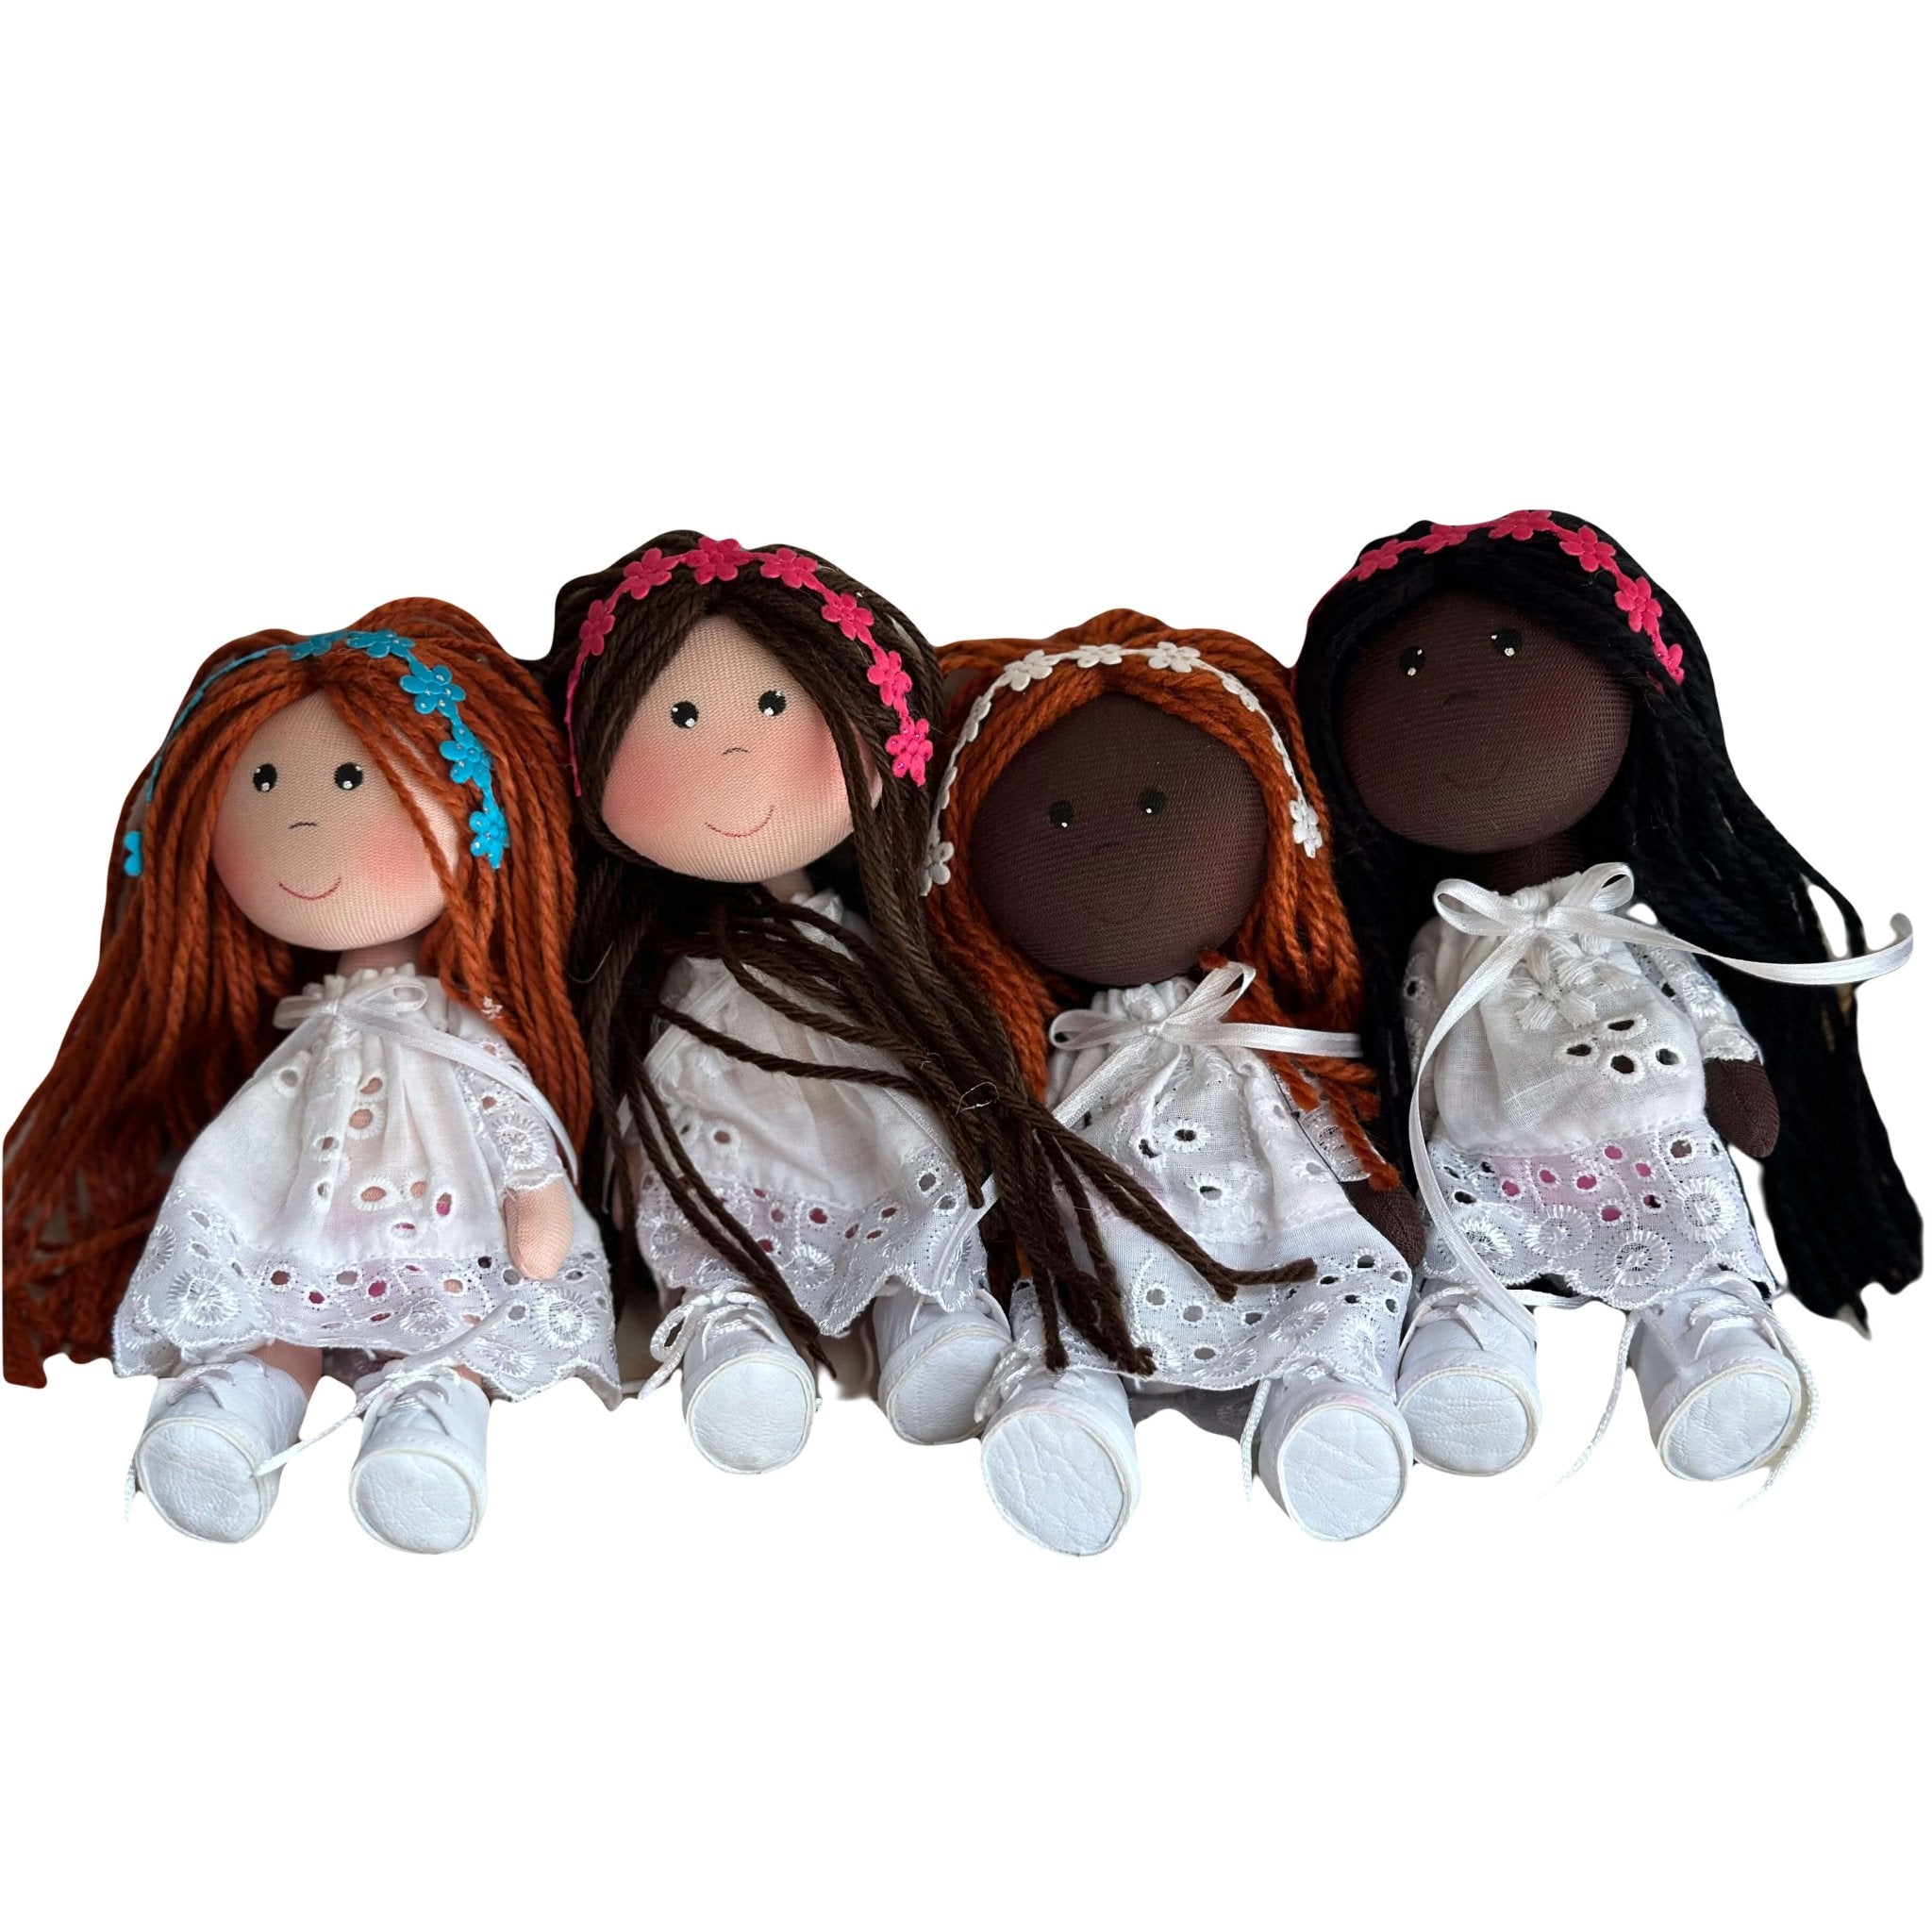 Cute rag dolls handmade in Colombia. There are 4 dolls wearing a white crochet dress with different skin and hair colors. They are also wearing flower headbands.